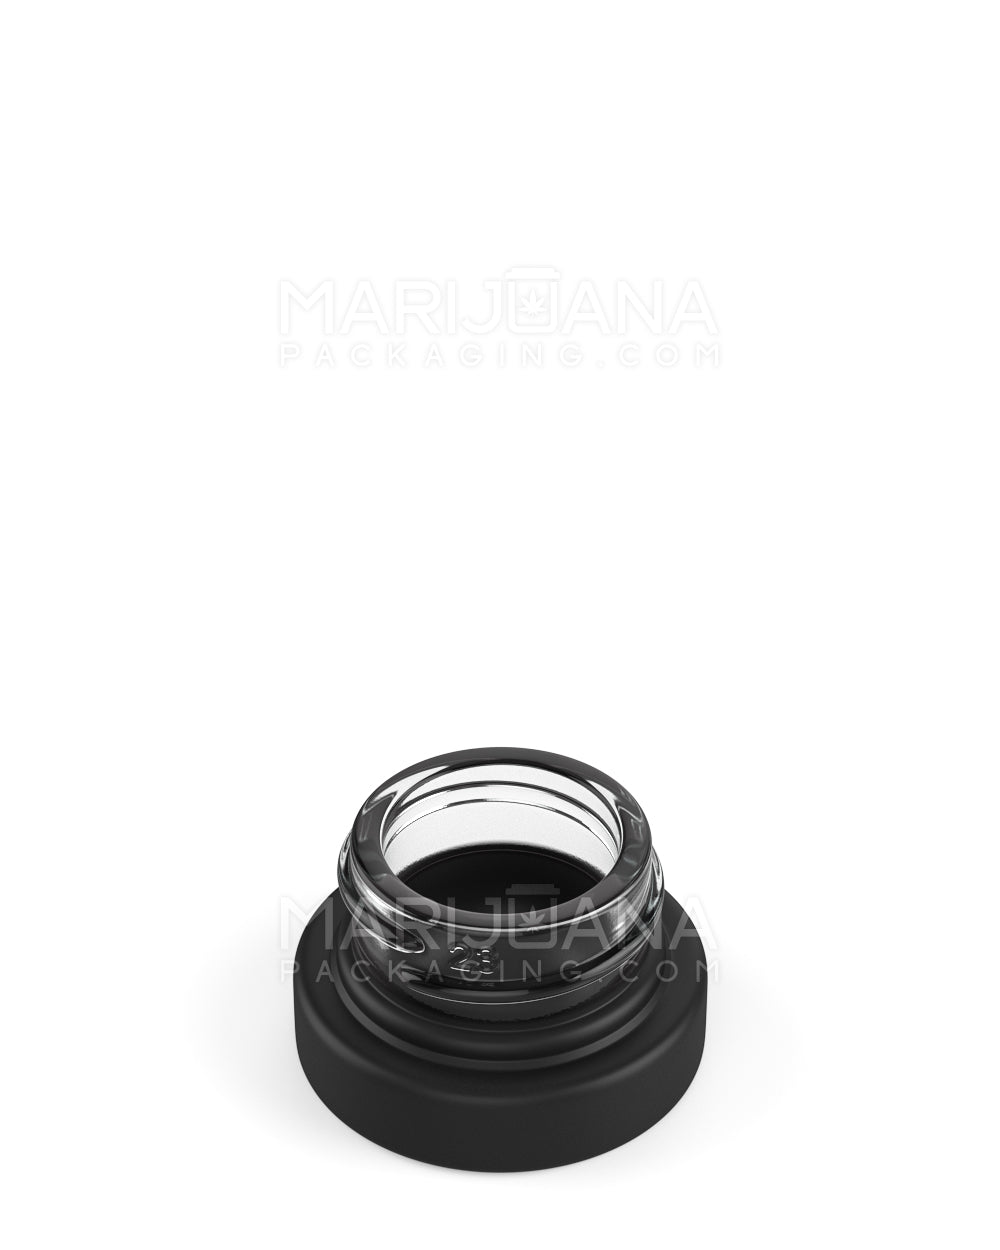 Matte Black Glass Concentrate Containers | 28mm - 5mL - 504 Count - 2